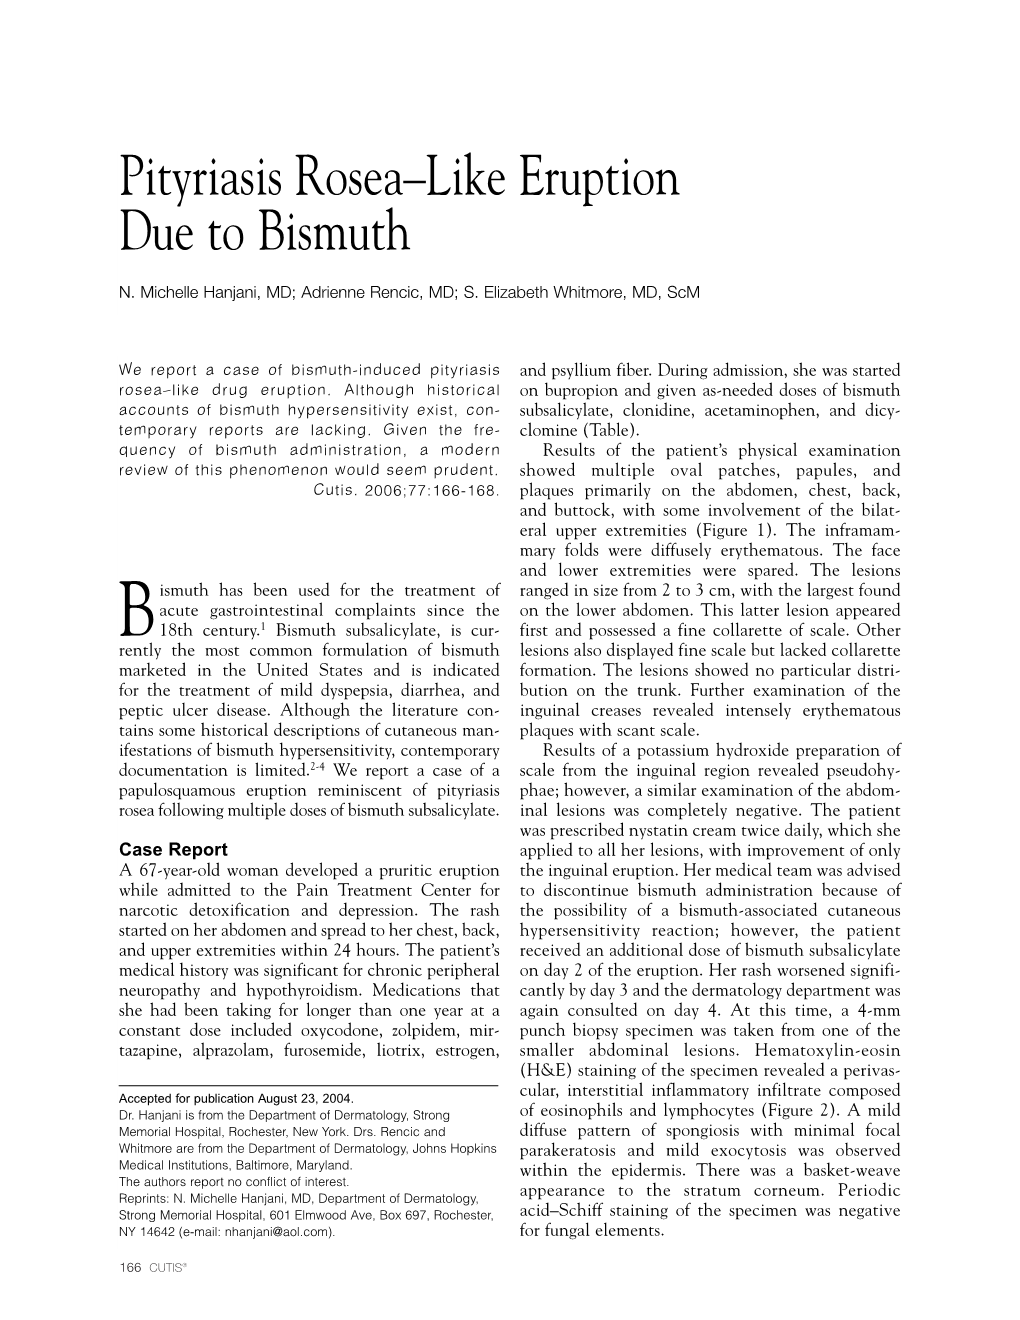 Pityriasis Rosea–Like Eruption Due to Bismuth